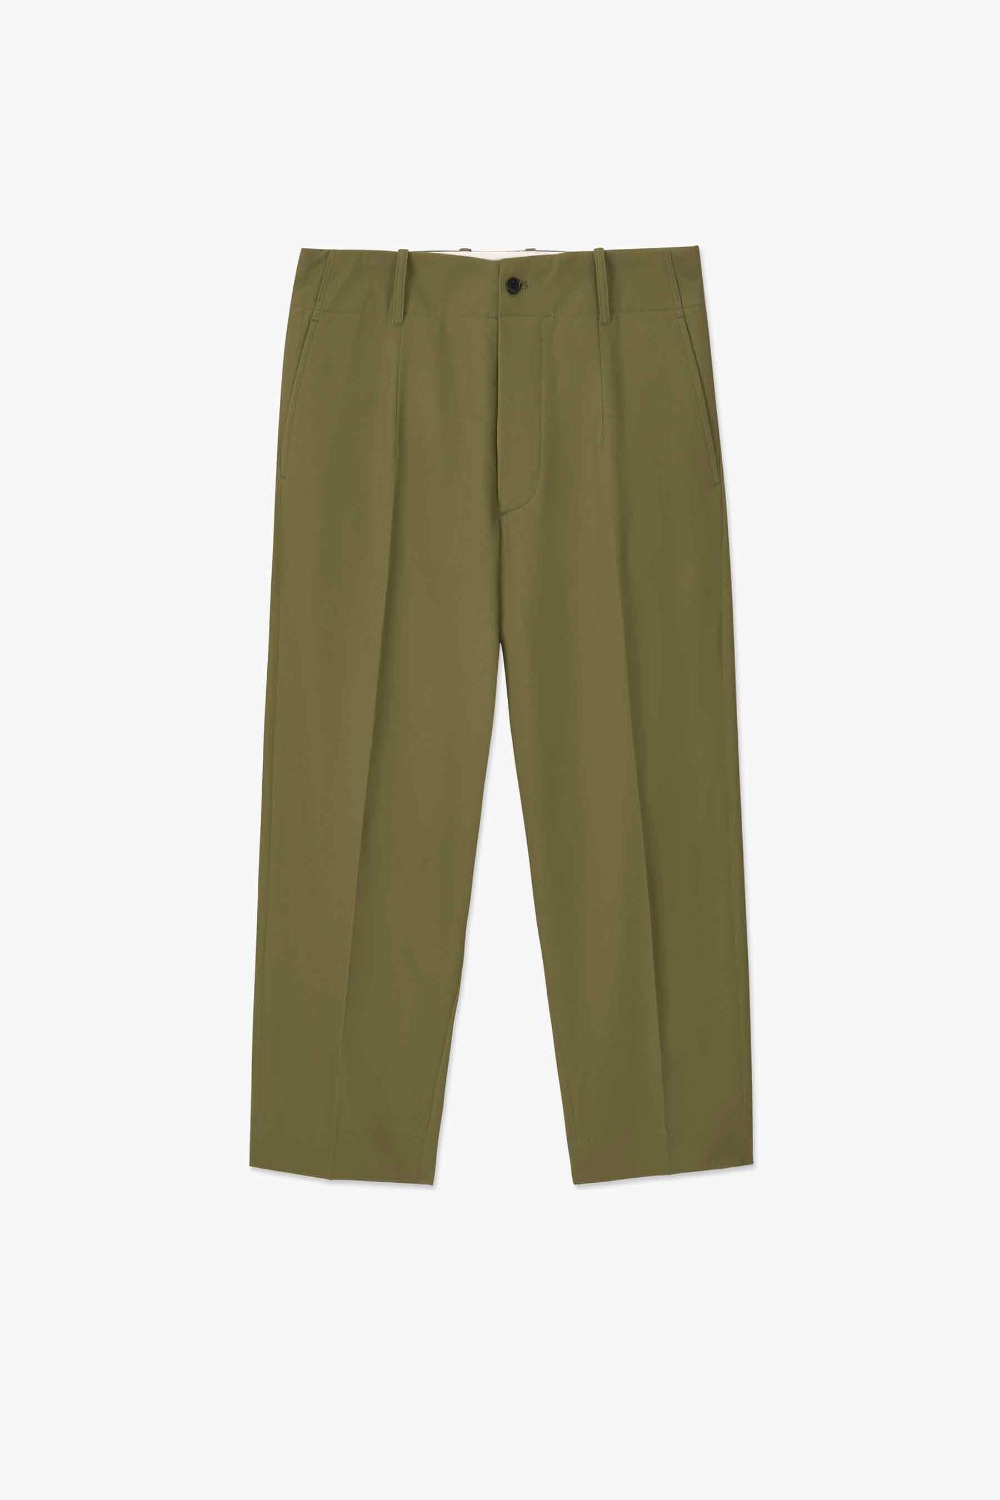 KHAKI COMPORT TAPERED SILICONE DIPING PANTS